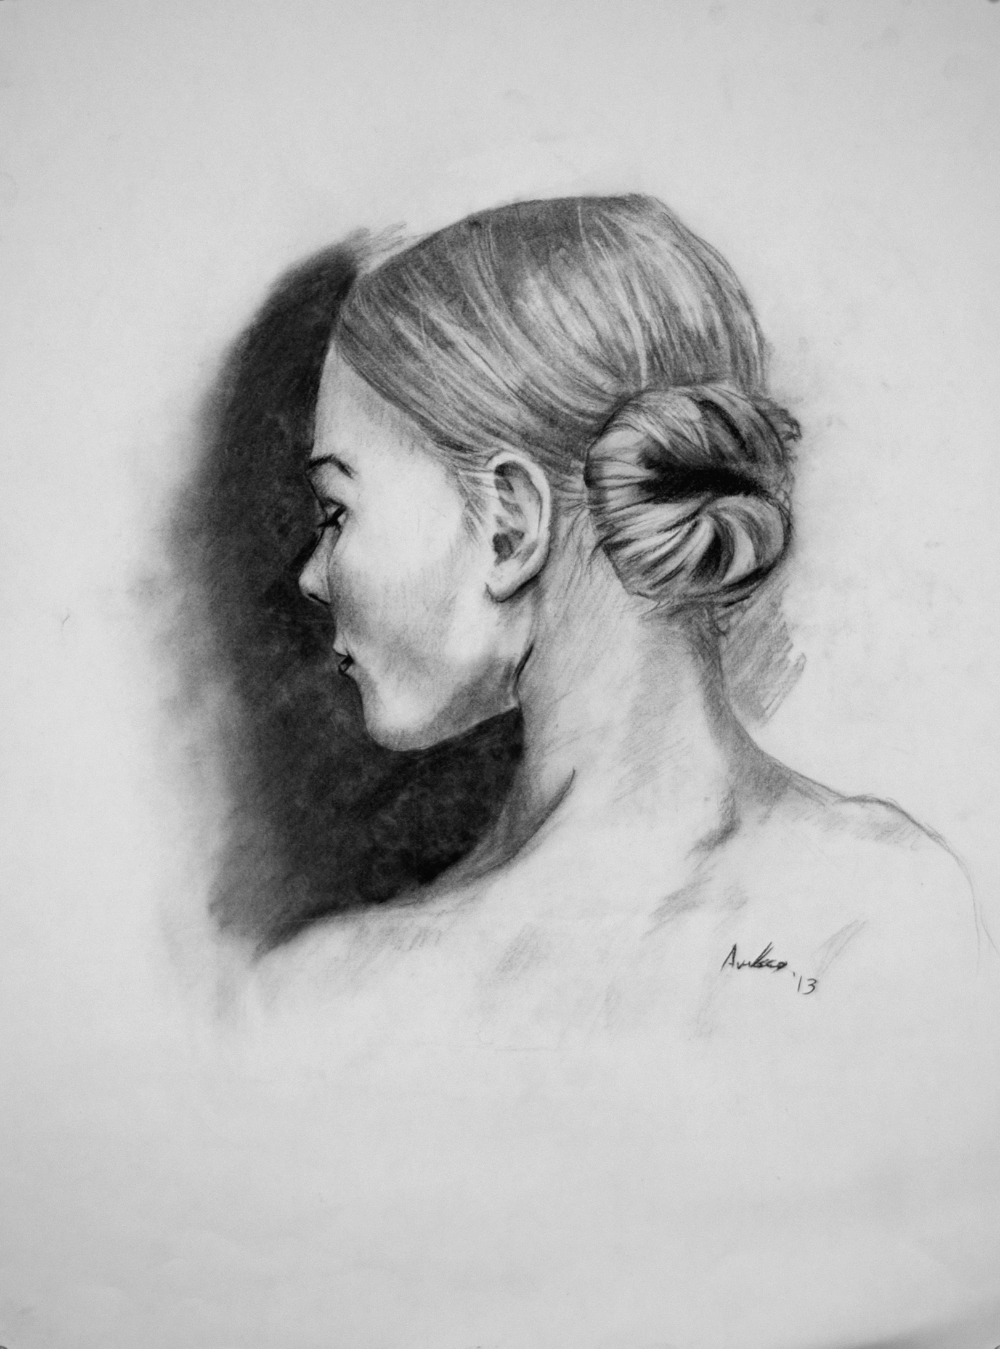 thumbnail of Untitled by Adrian Jason Velasco. medium: charcoal on paper. date: 2013. dimensions: 24 x 18 inches